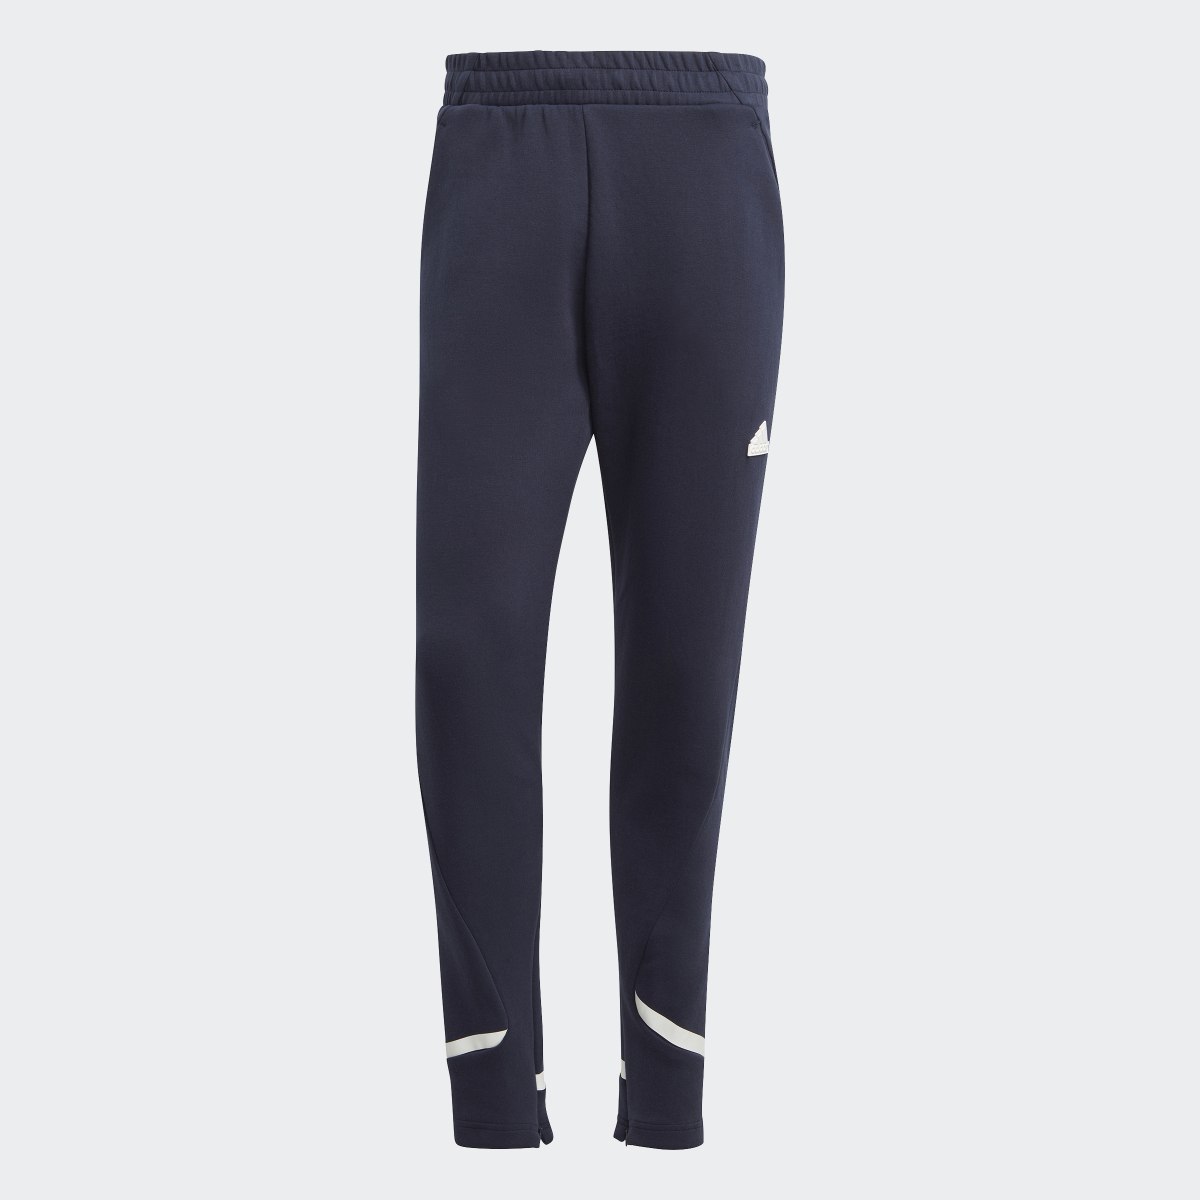 Adidas Designed for Gameday Pants. 4